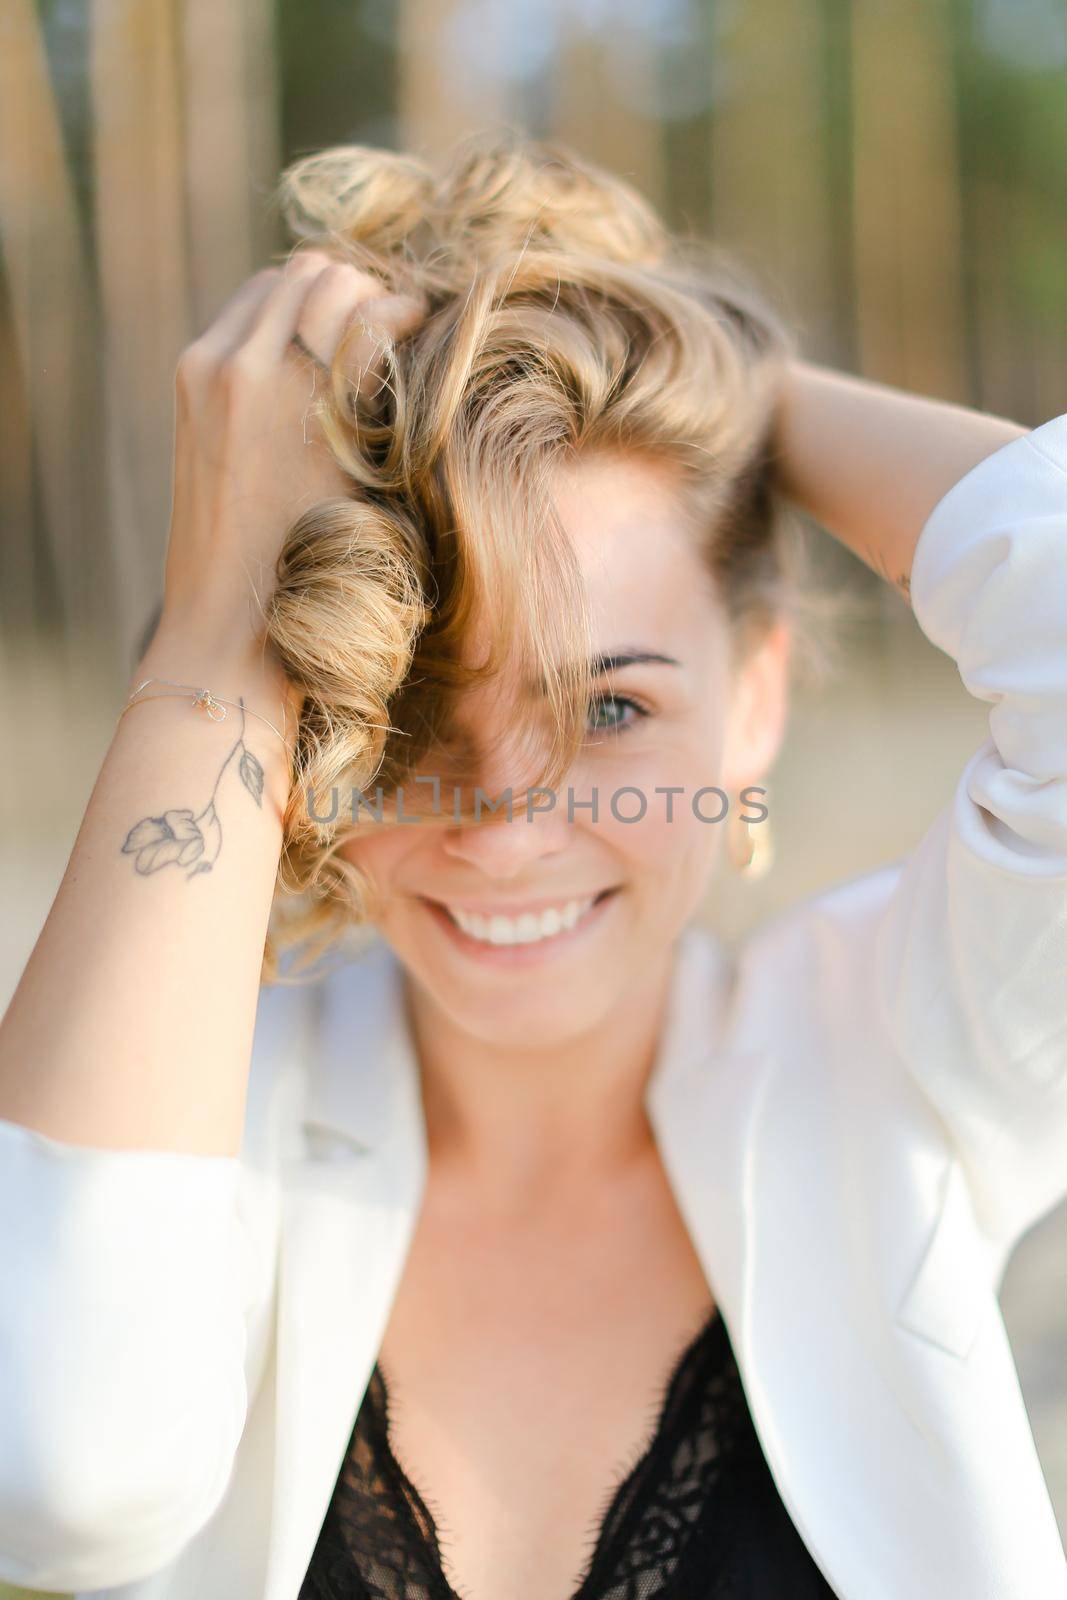 Portraint of young ute woman with little hand tattoo wearing white shirt and black bra. by sisterspro